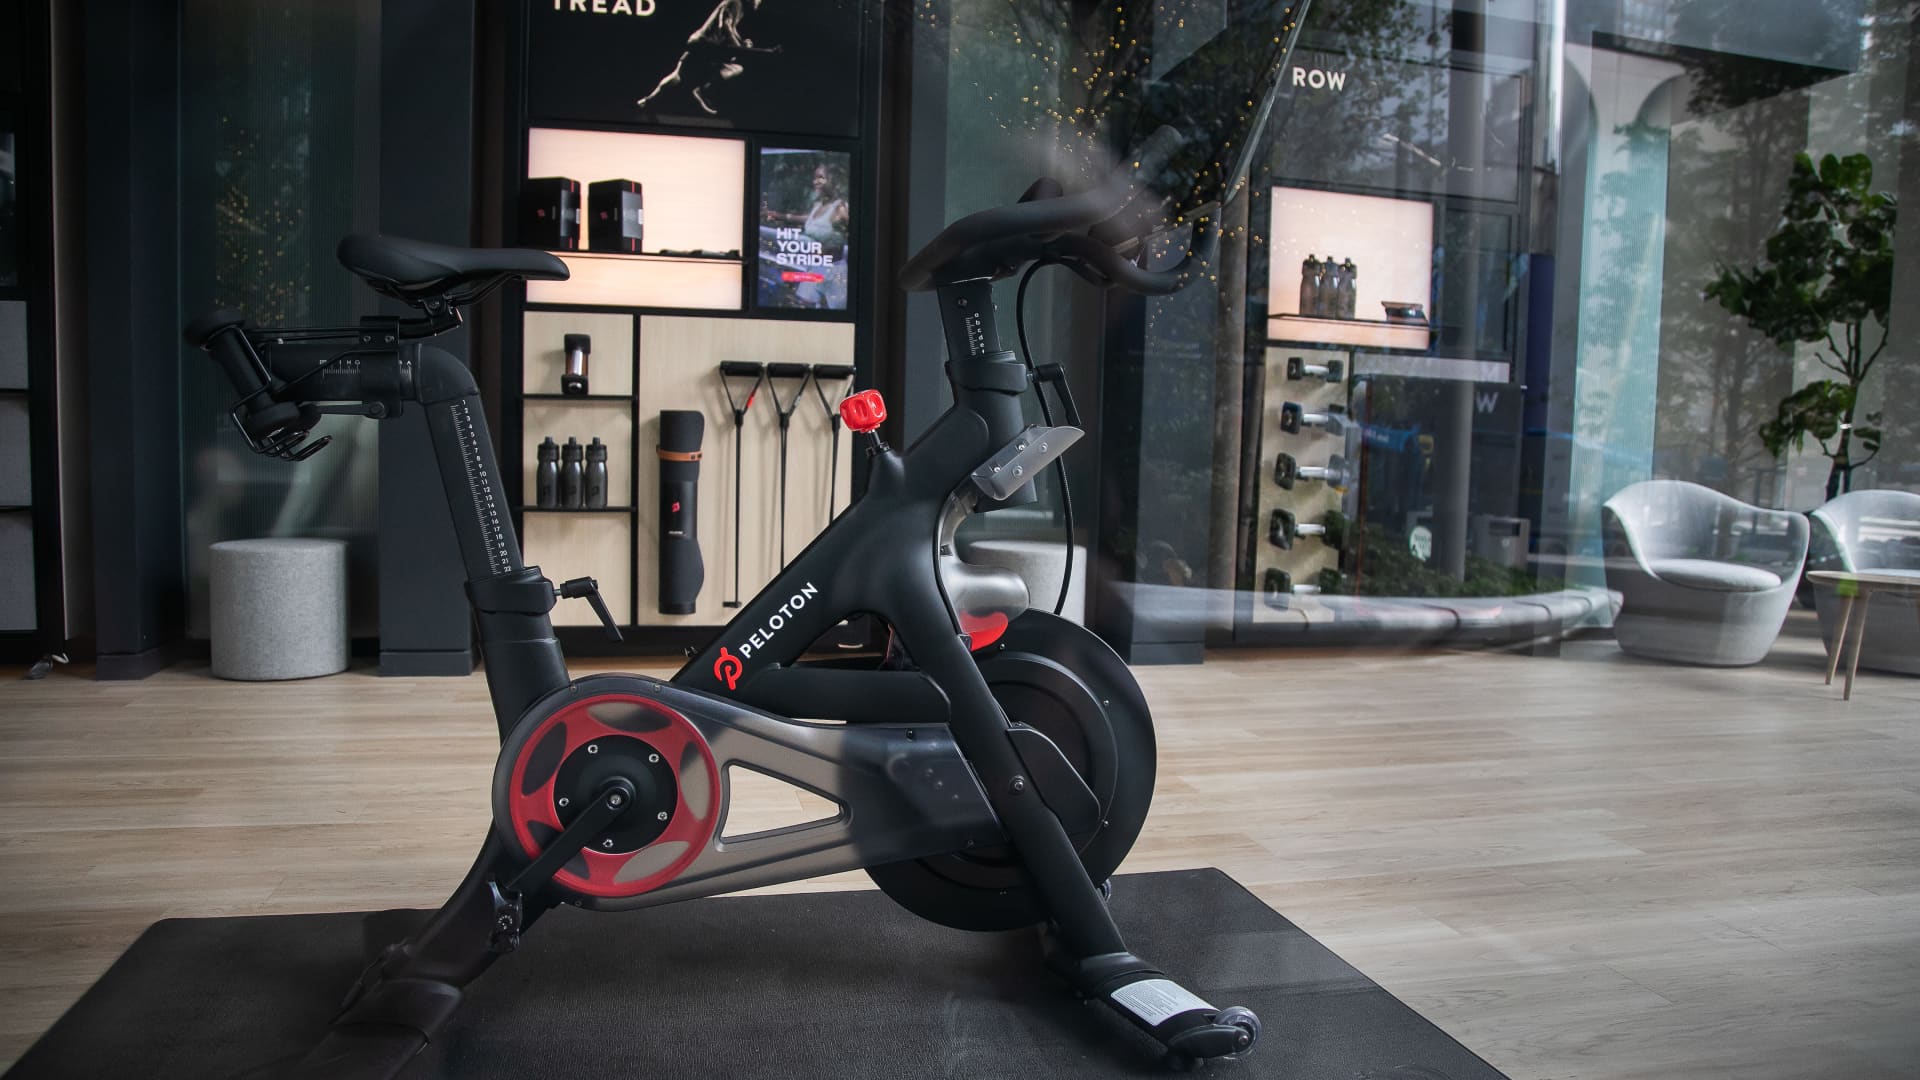 Here’s how much money you’d have lost if you invested $1,000 in Peloton when it went public